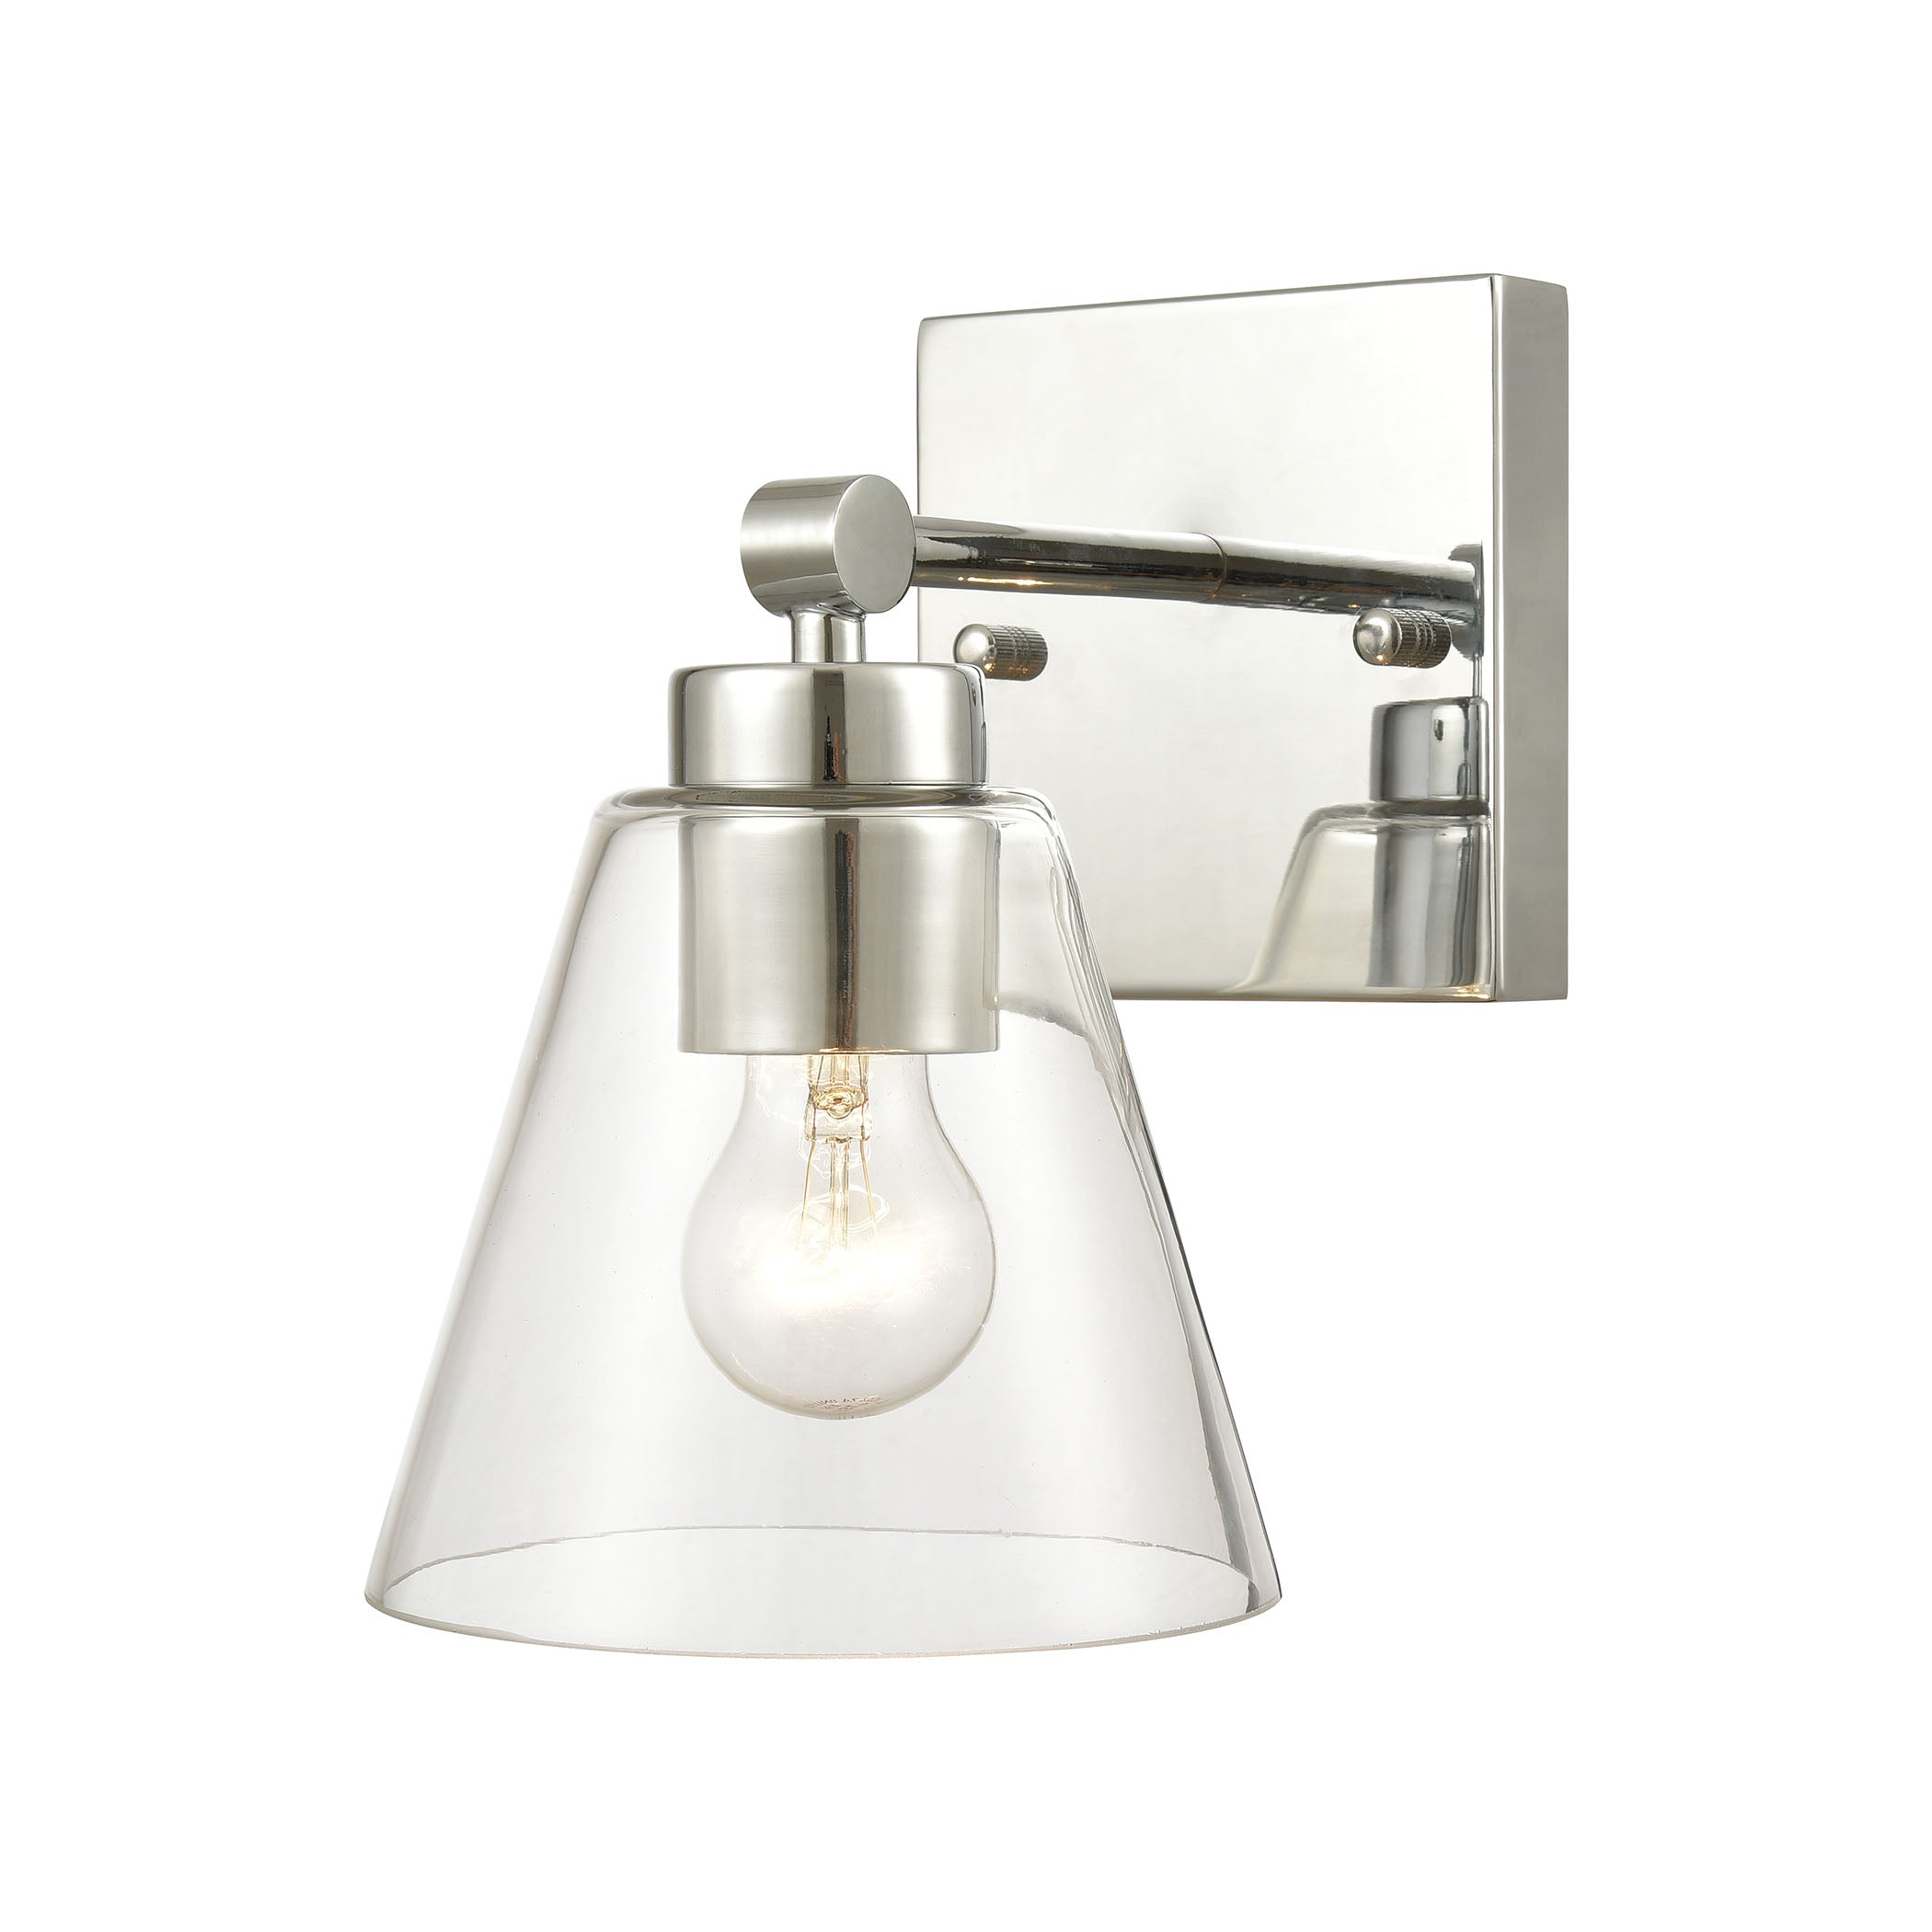 ELK Lighting 18343/1 East Point 1-Light Vanity Light in Polished Chrome with Clear Glass